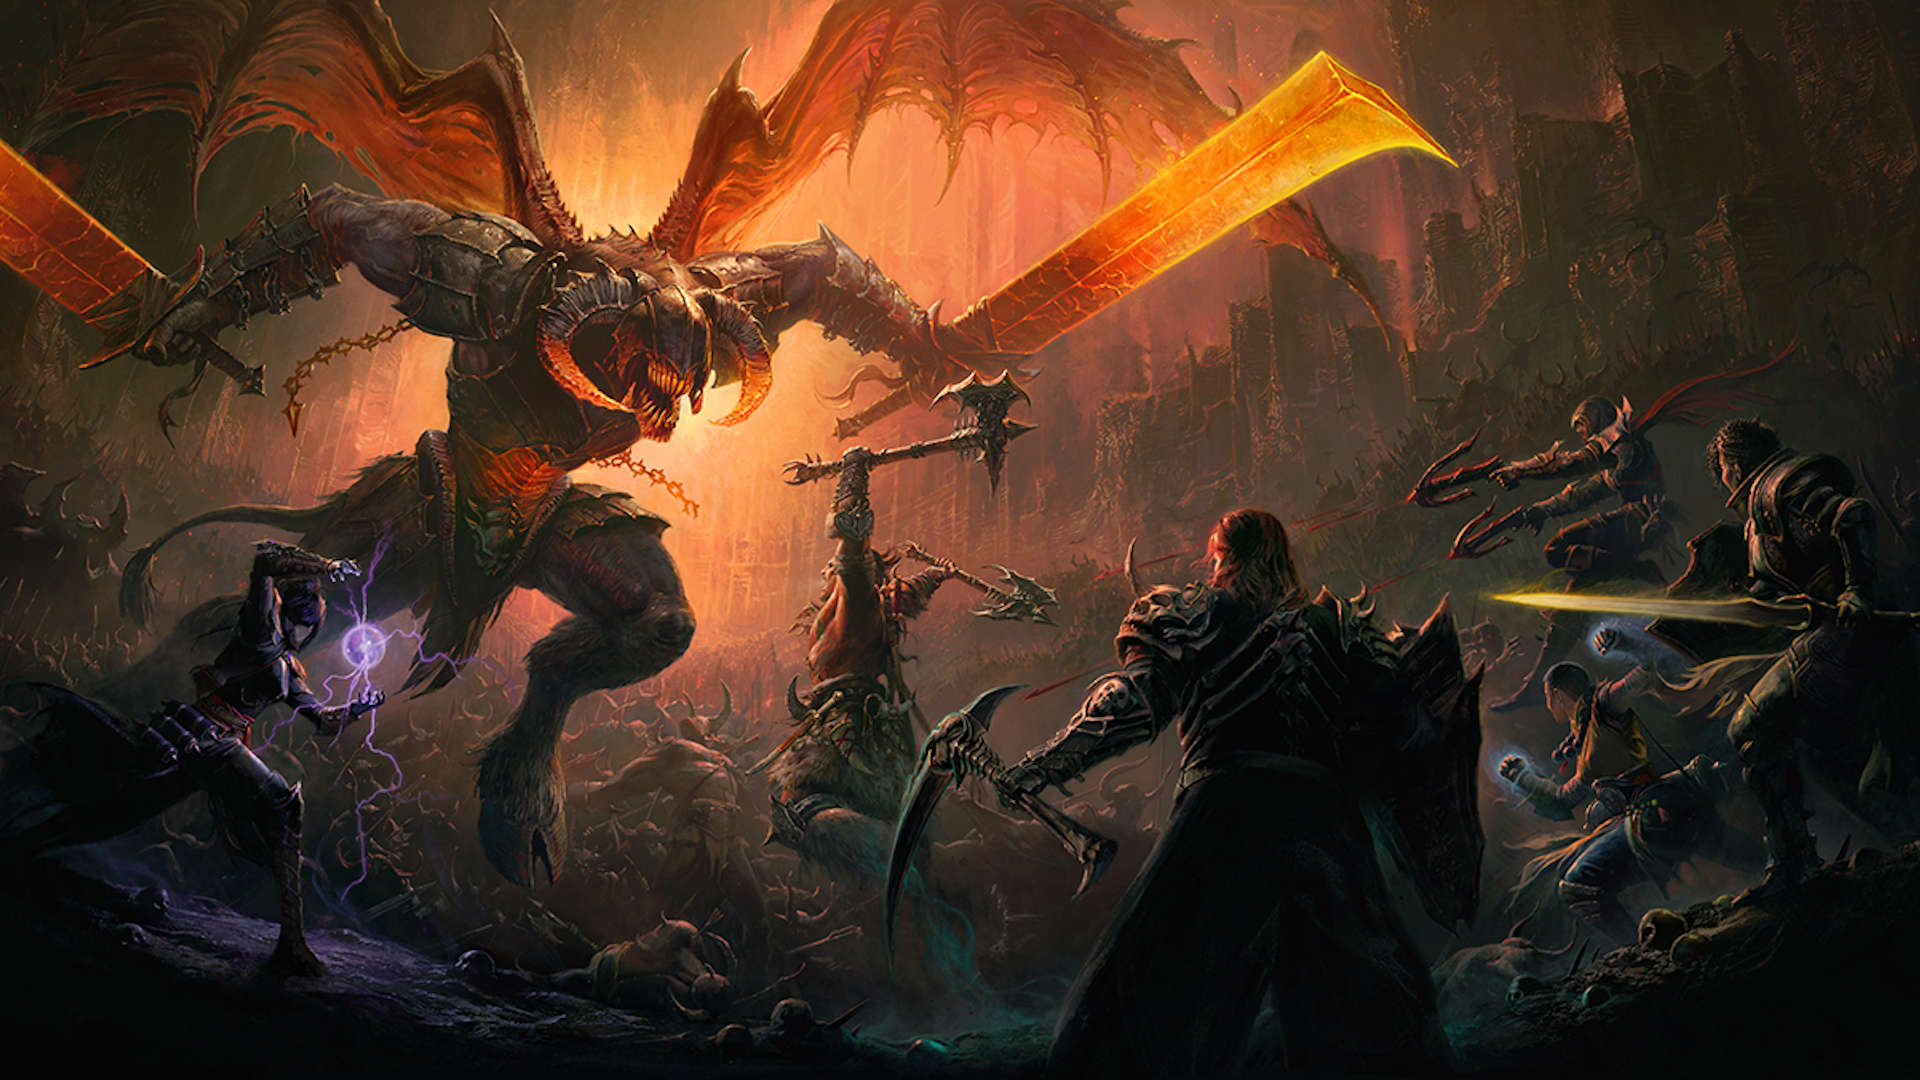 Diablo Immortal: The “Cycle of Strife”, An optional PVP system, Cooperative multiplayer elements. 1920x1080 Full HD Wallpaper.